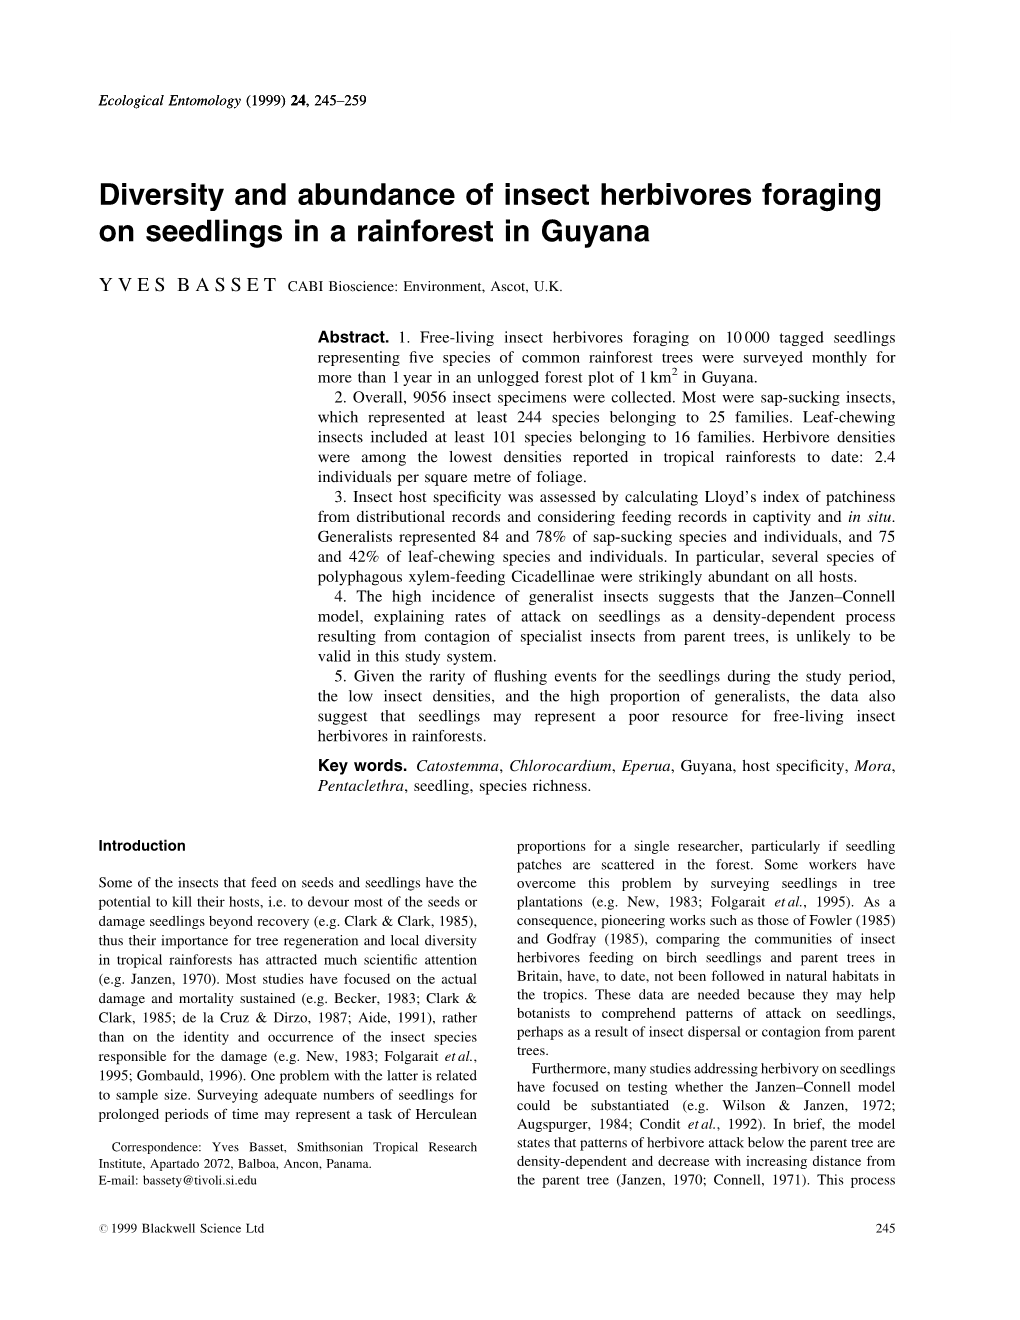 Diversity and Abundance of Insect Herbivores Foraging on Seedlings in a Rainforest in Guyana